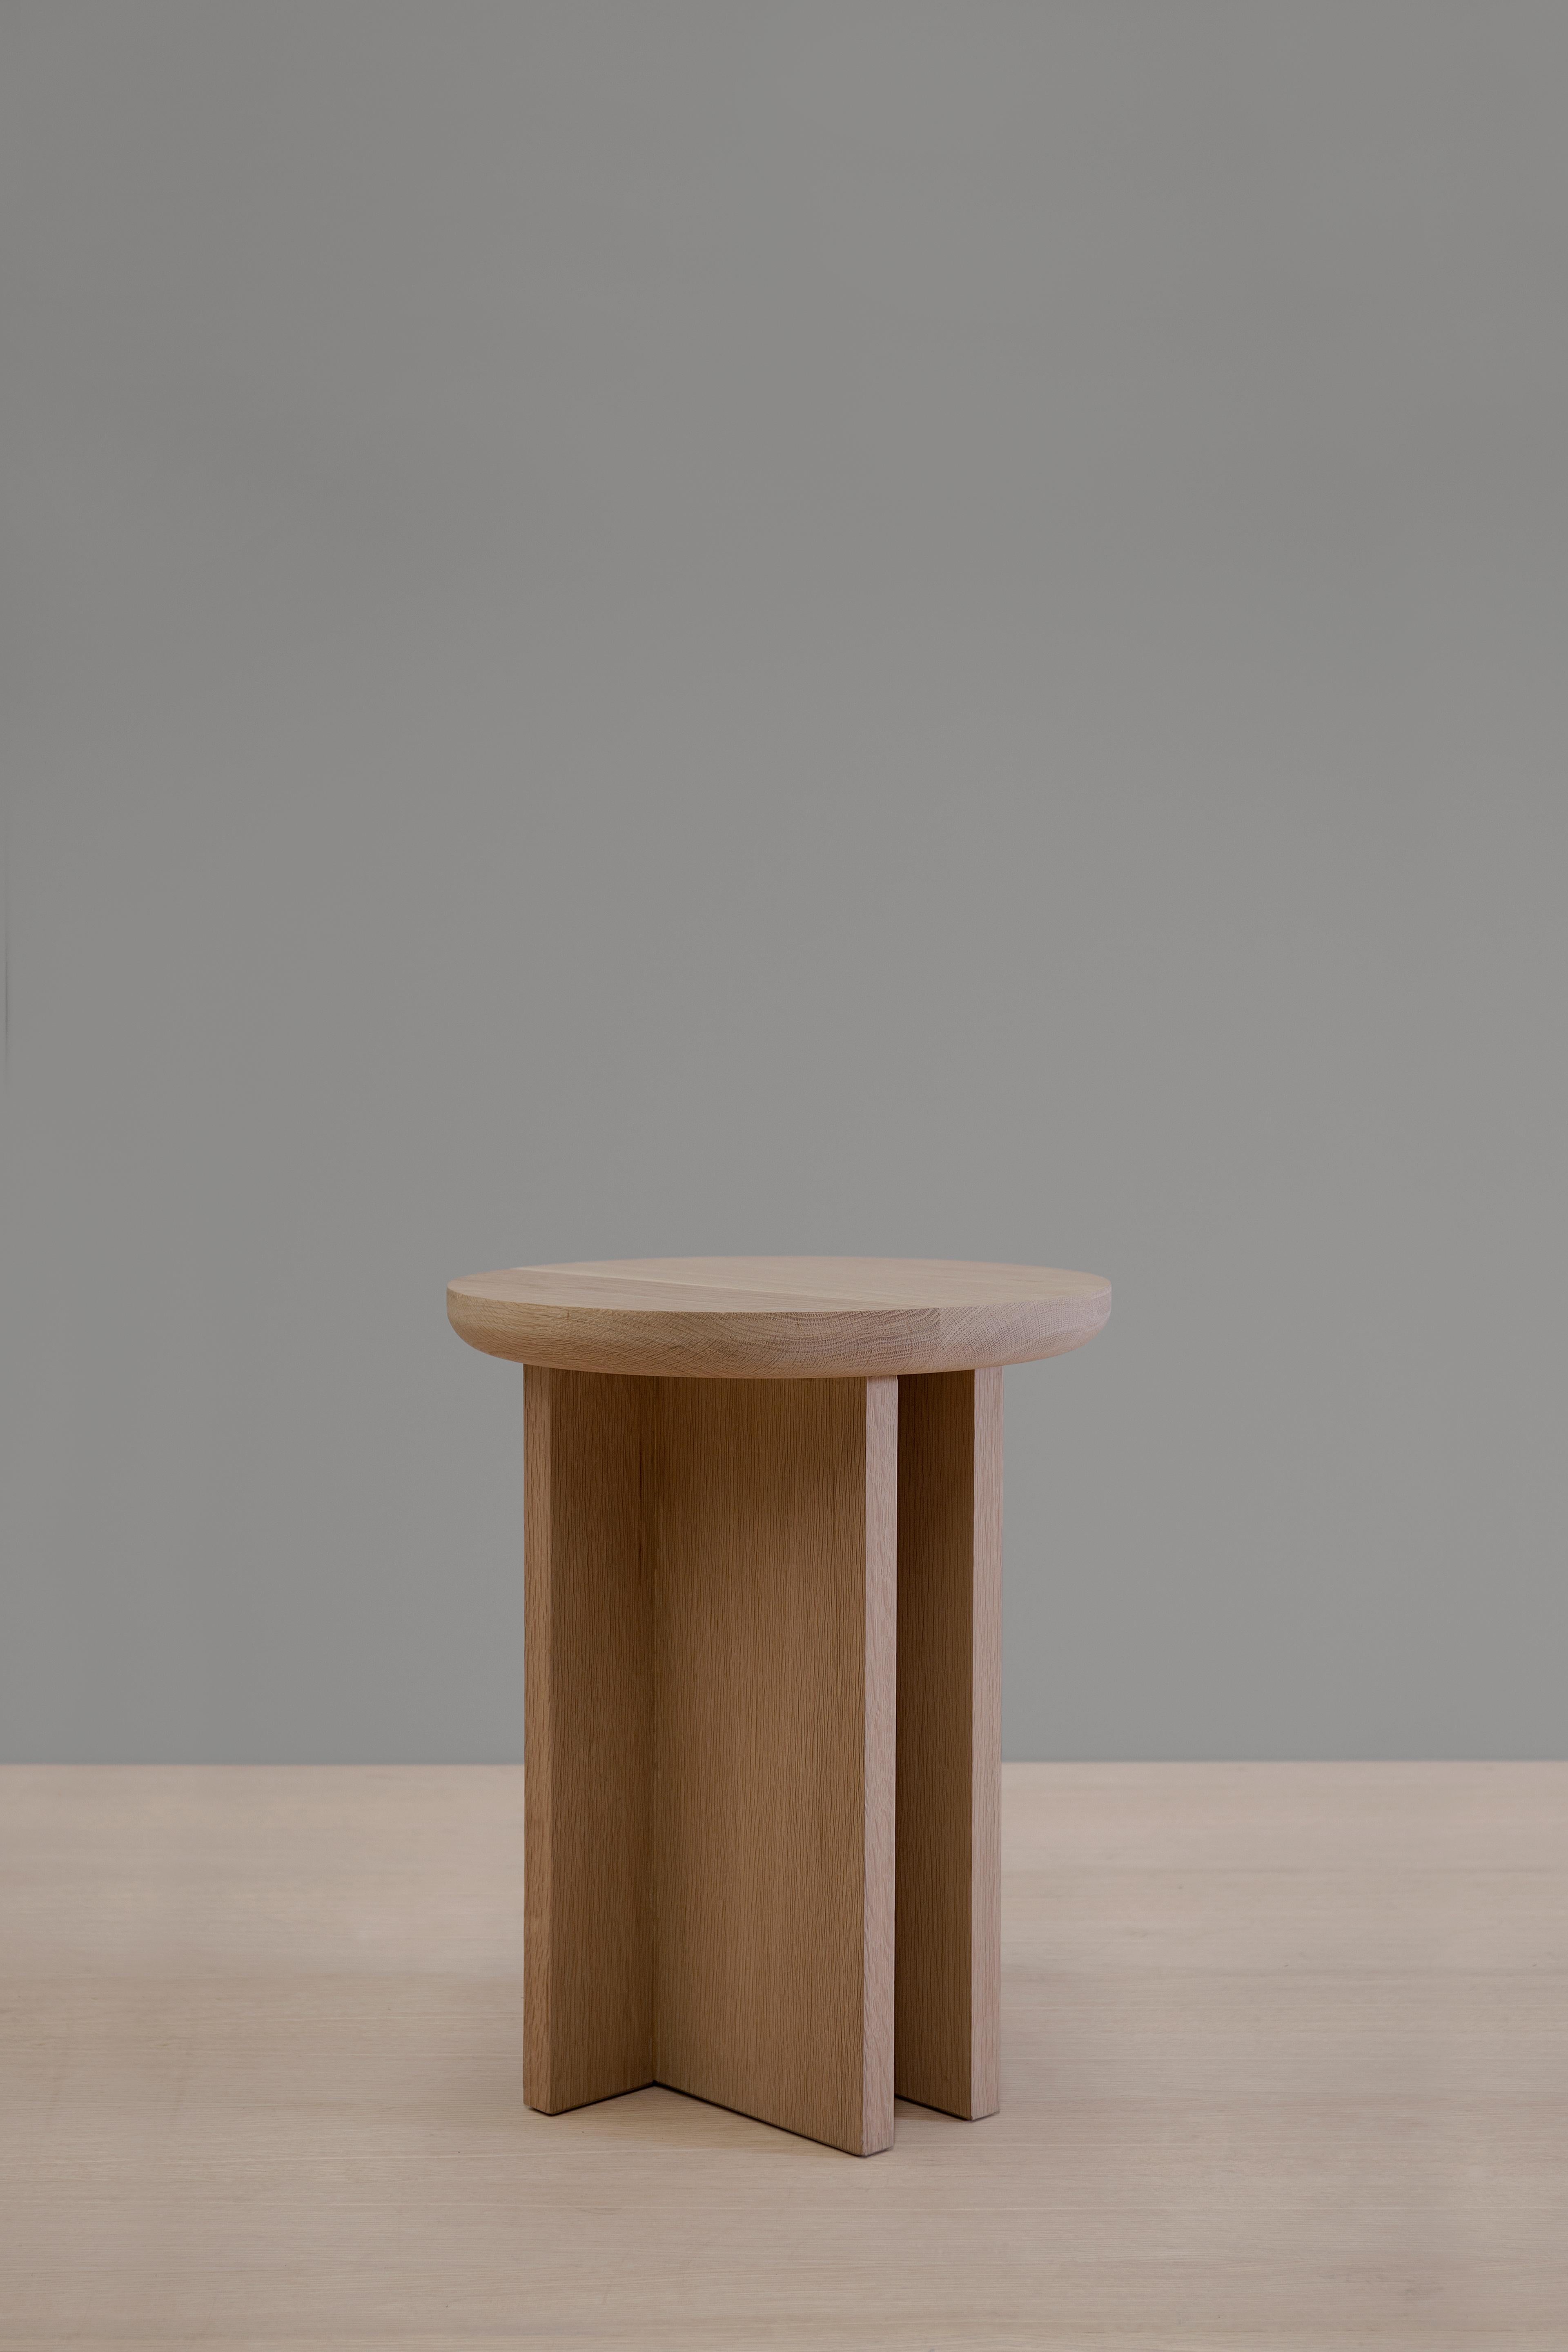 Antropología 03 is an oak stool and side table designed by Raul de la Cerda for Breuer Estudio. This pies is part of Antropología Collection in which Raul collaborated with Breuer to create exceptional pieces. 

Raul de la Cerda is an